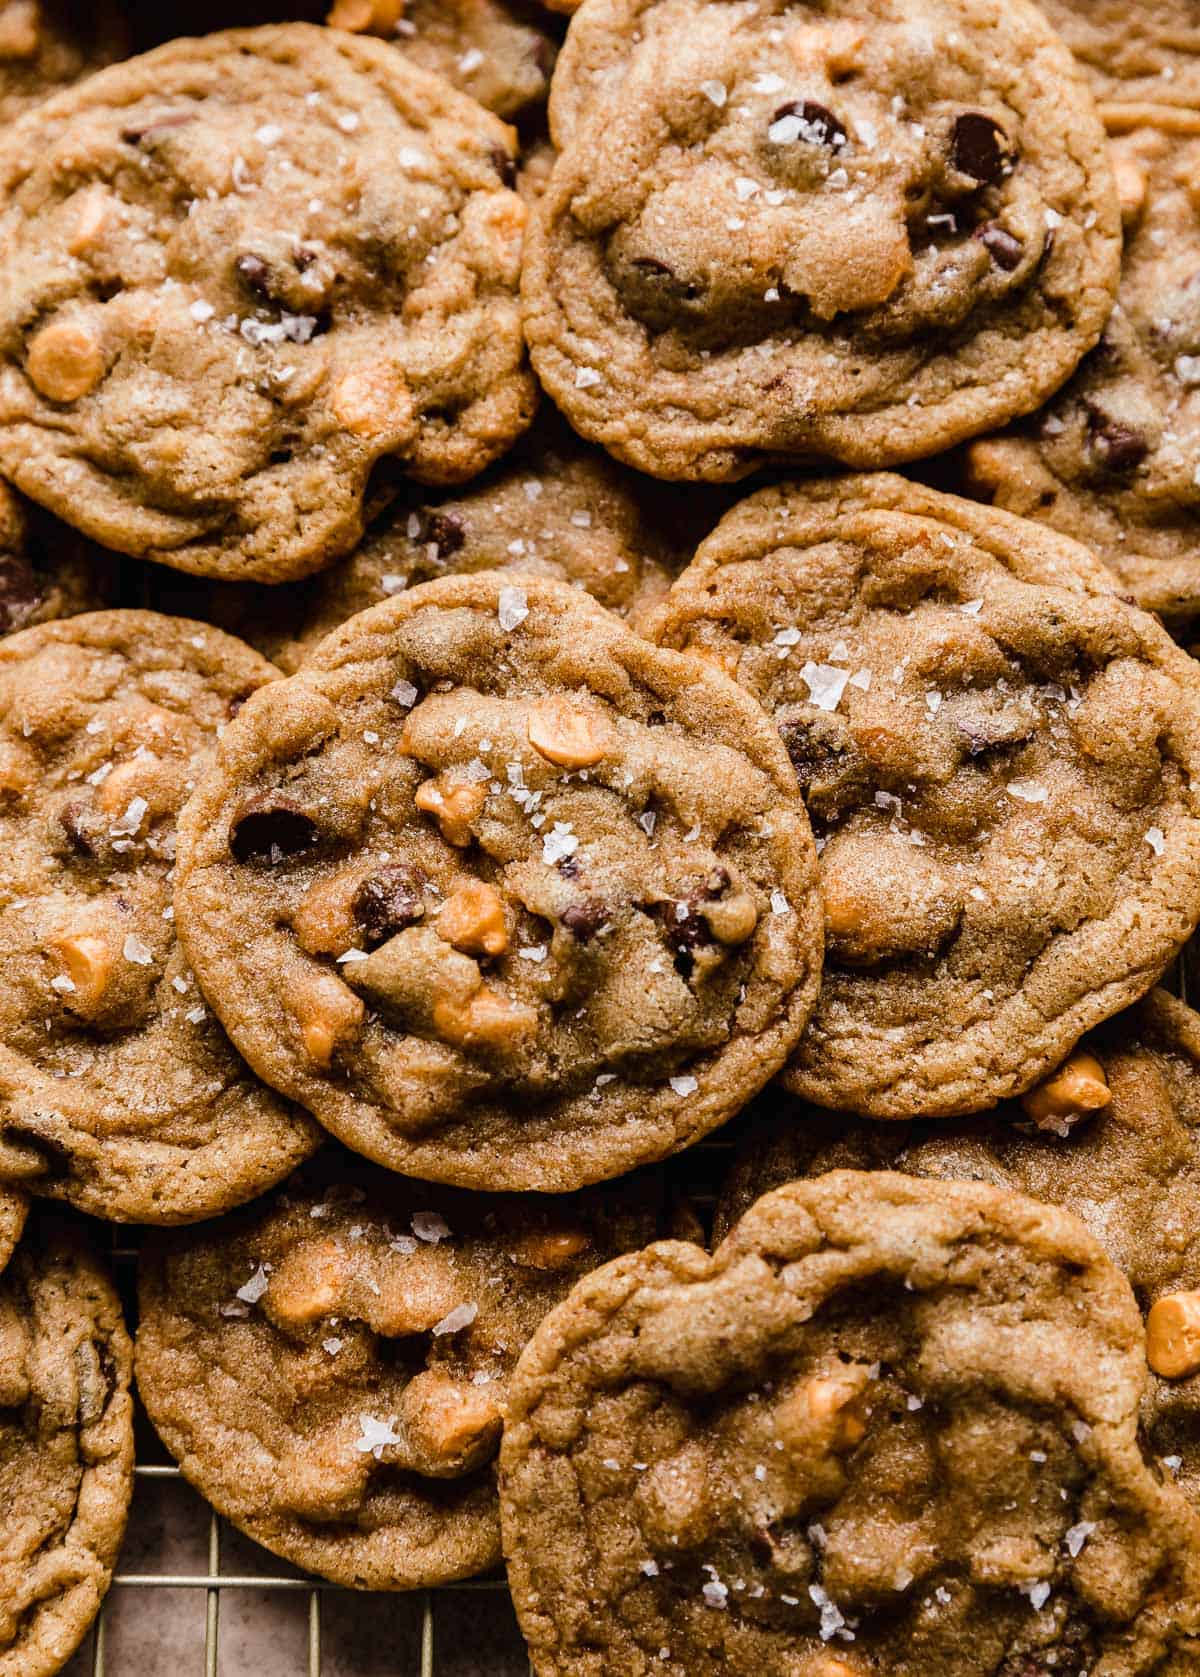 Butterscotch Chocolate Chip Cookies topped with sea salt.